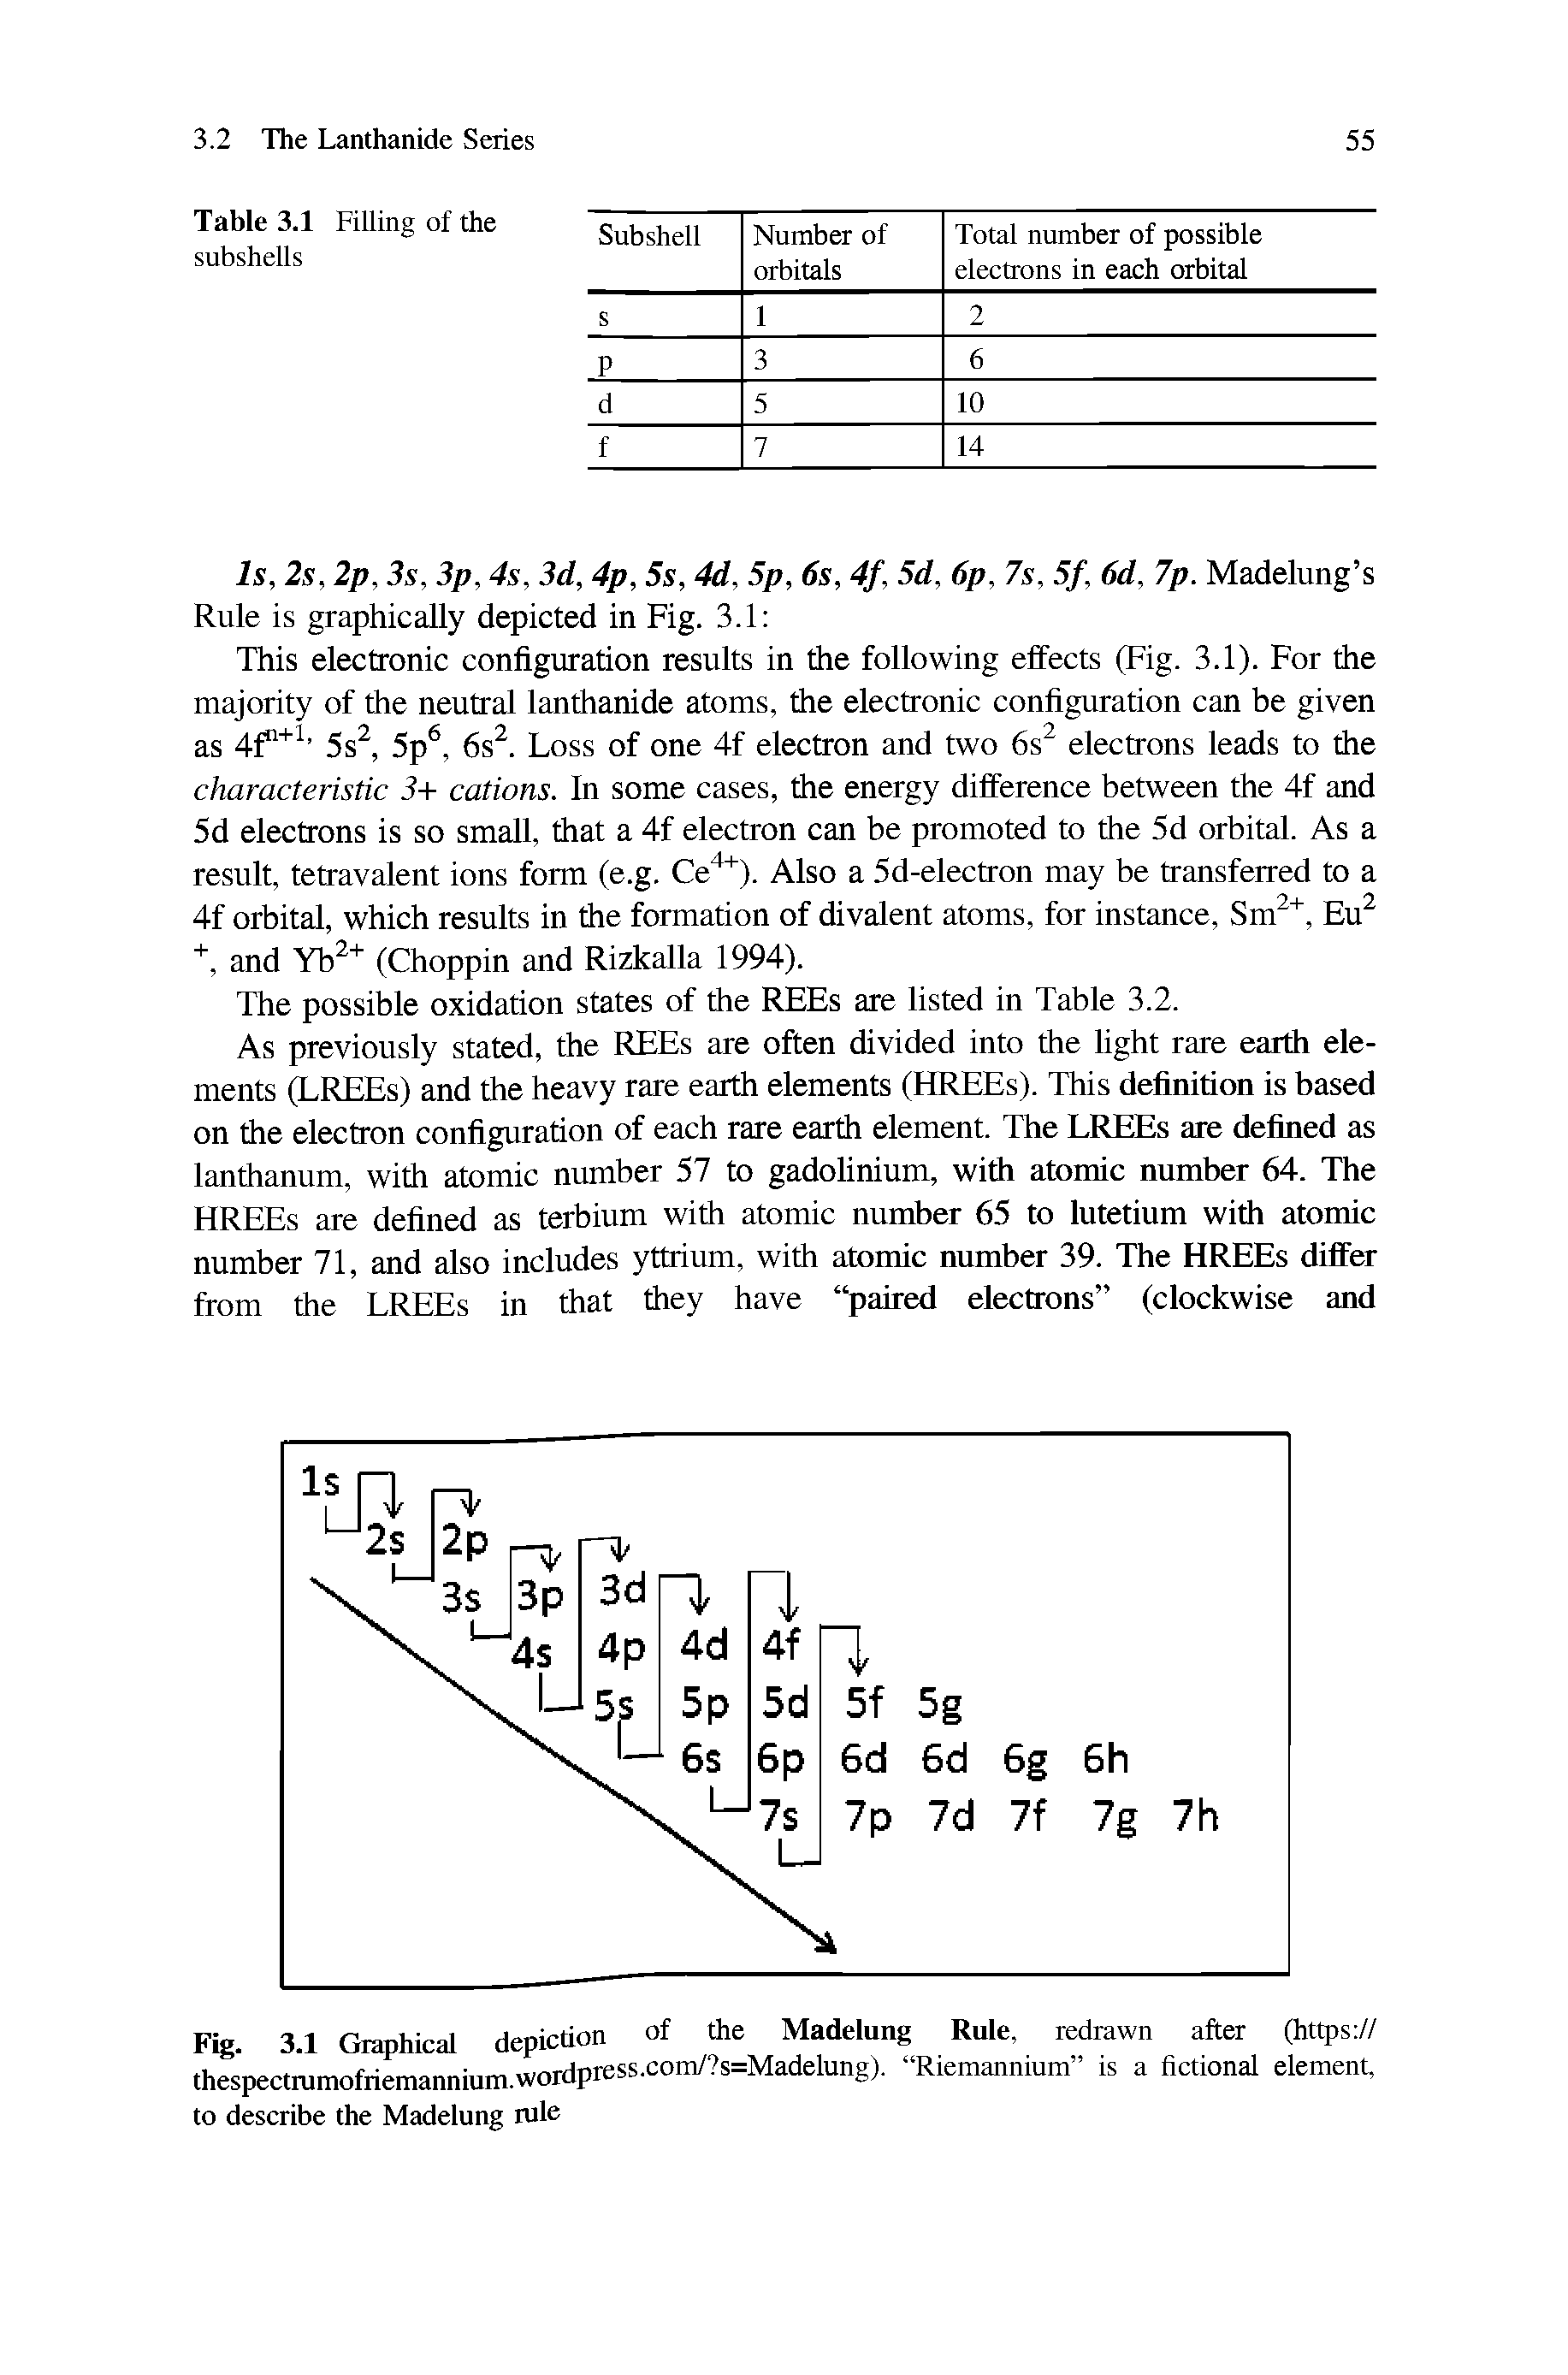 Fig. 3.1 Graphical depiction of the Madelung Rule, redrawn after (https // thespectrumofrieniannium.wordpress.com/ s=Madelung). Riemannium is a fictional element, to describe the Madelung rale...